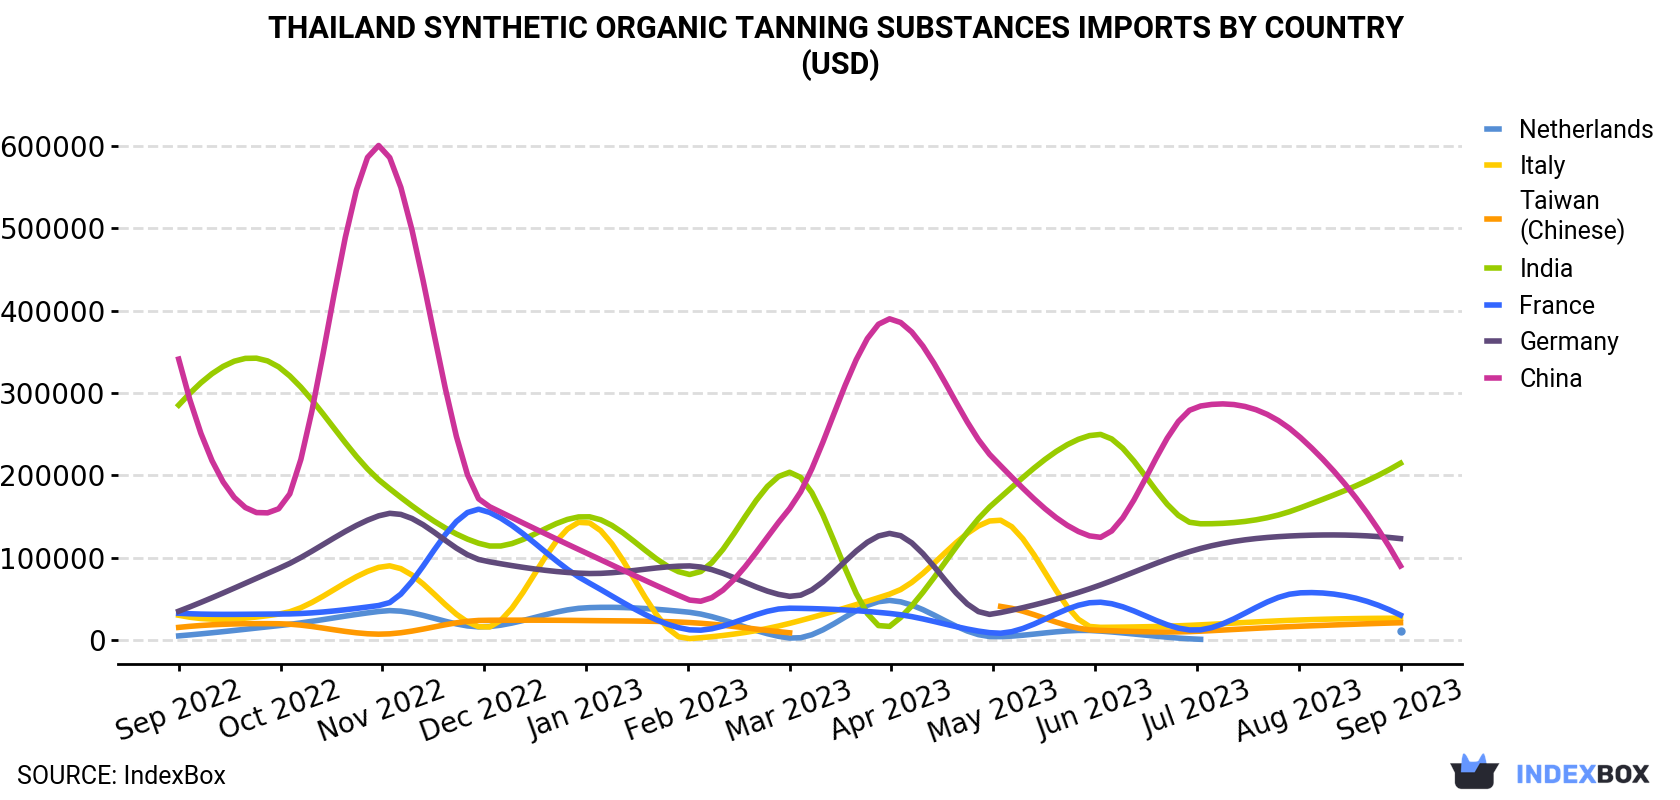 Thailand Synthetic Organic Tanning Substances Imports By Country (USD)